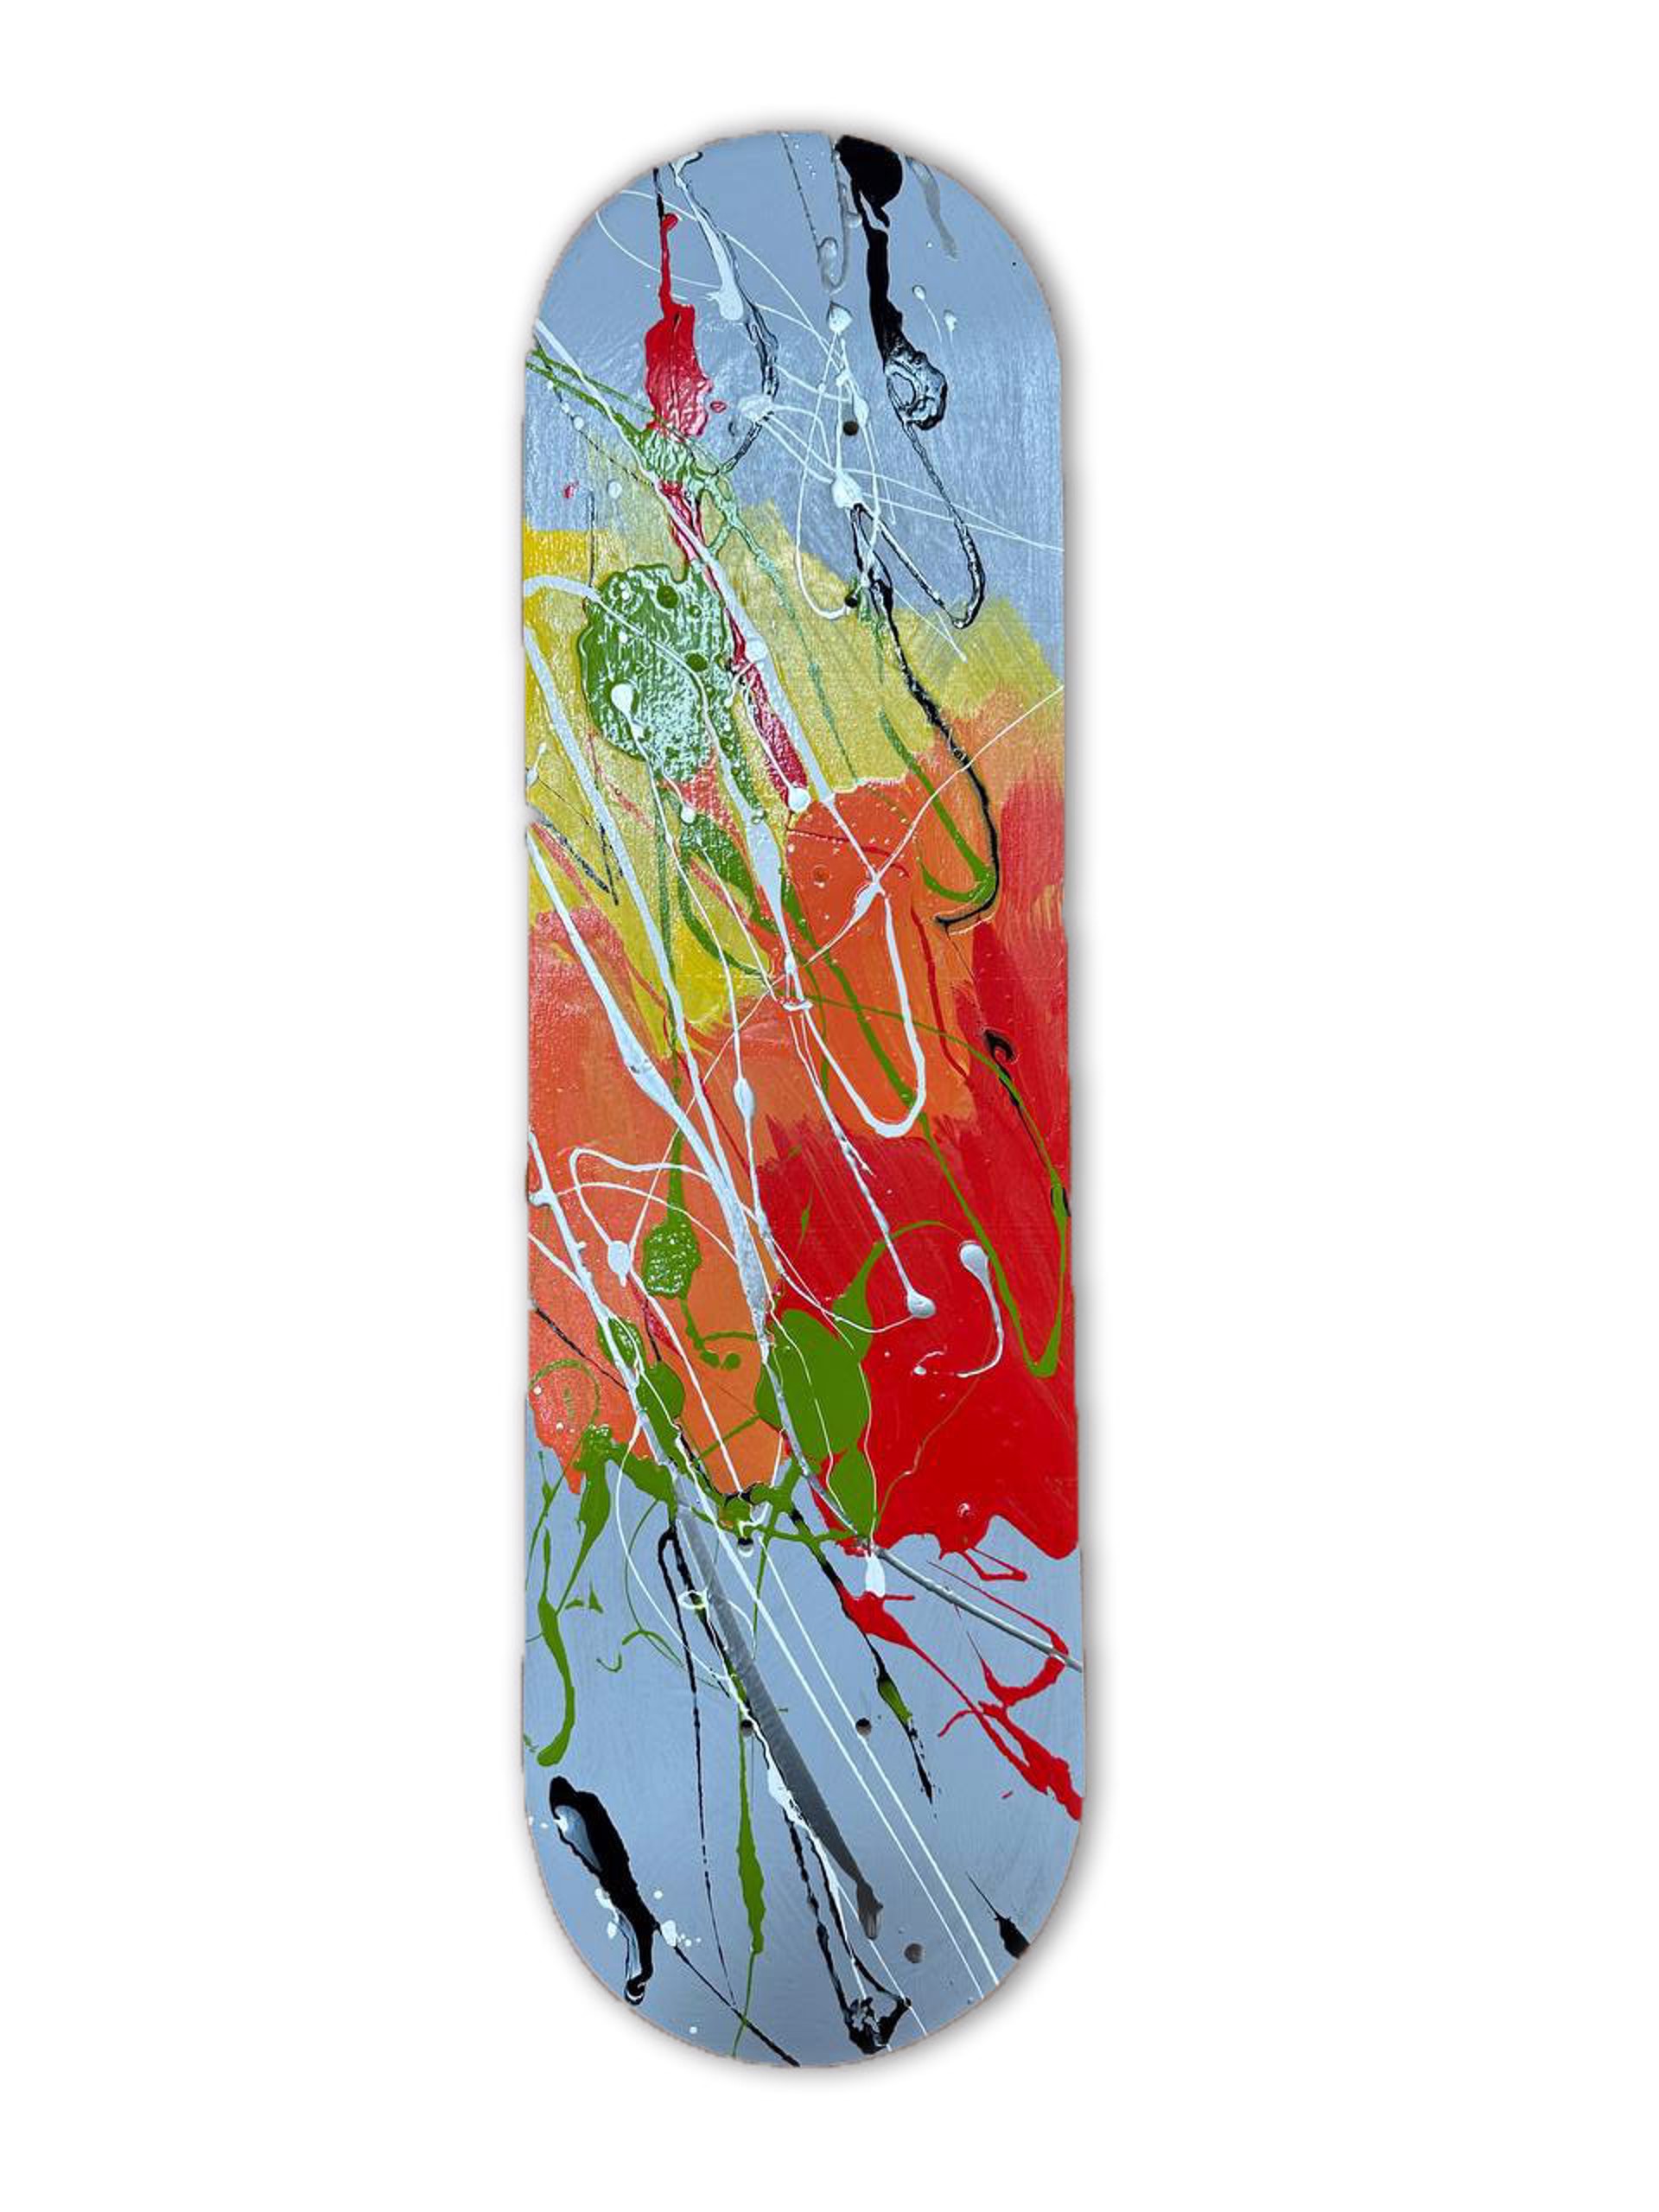 "Abstract Skateboard I (Red Orange Yellow)" by Abstract Skateboards Wall Sculptures by Elena Bulatova